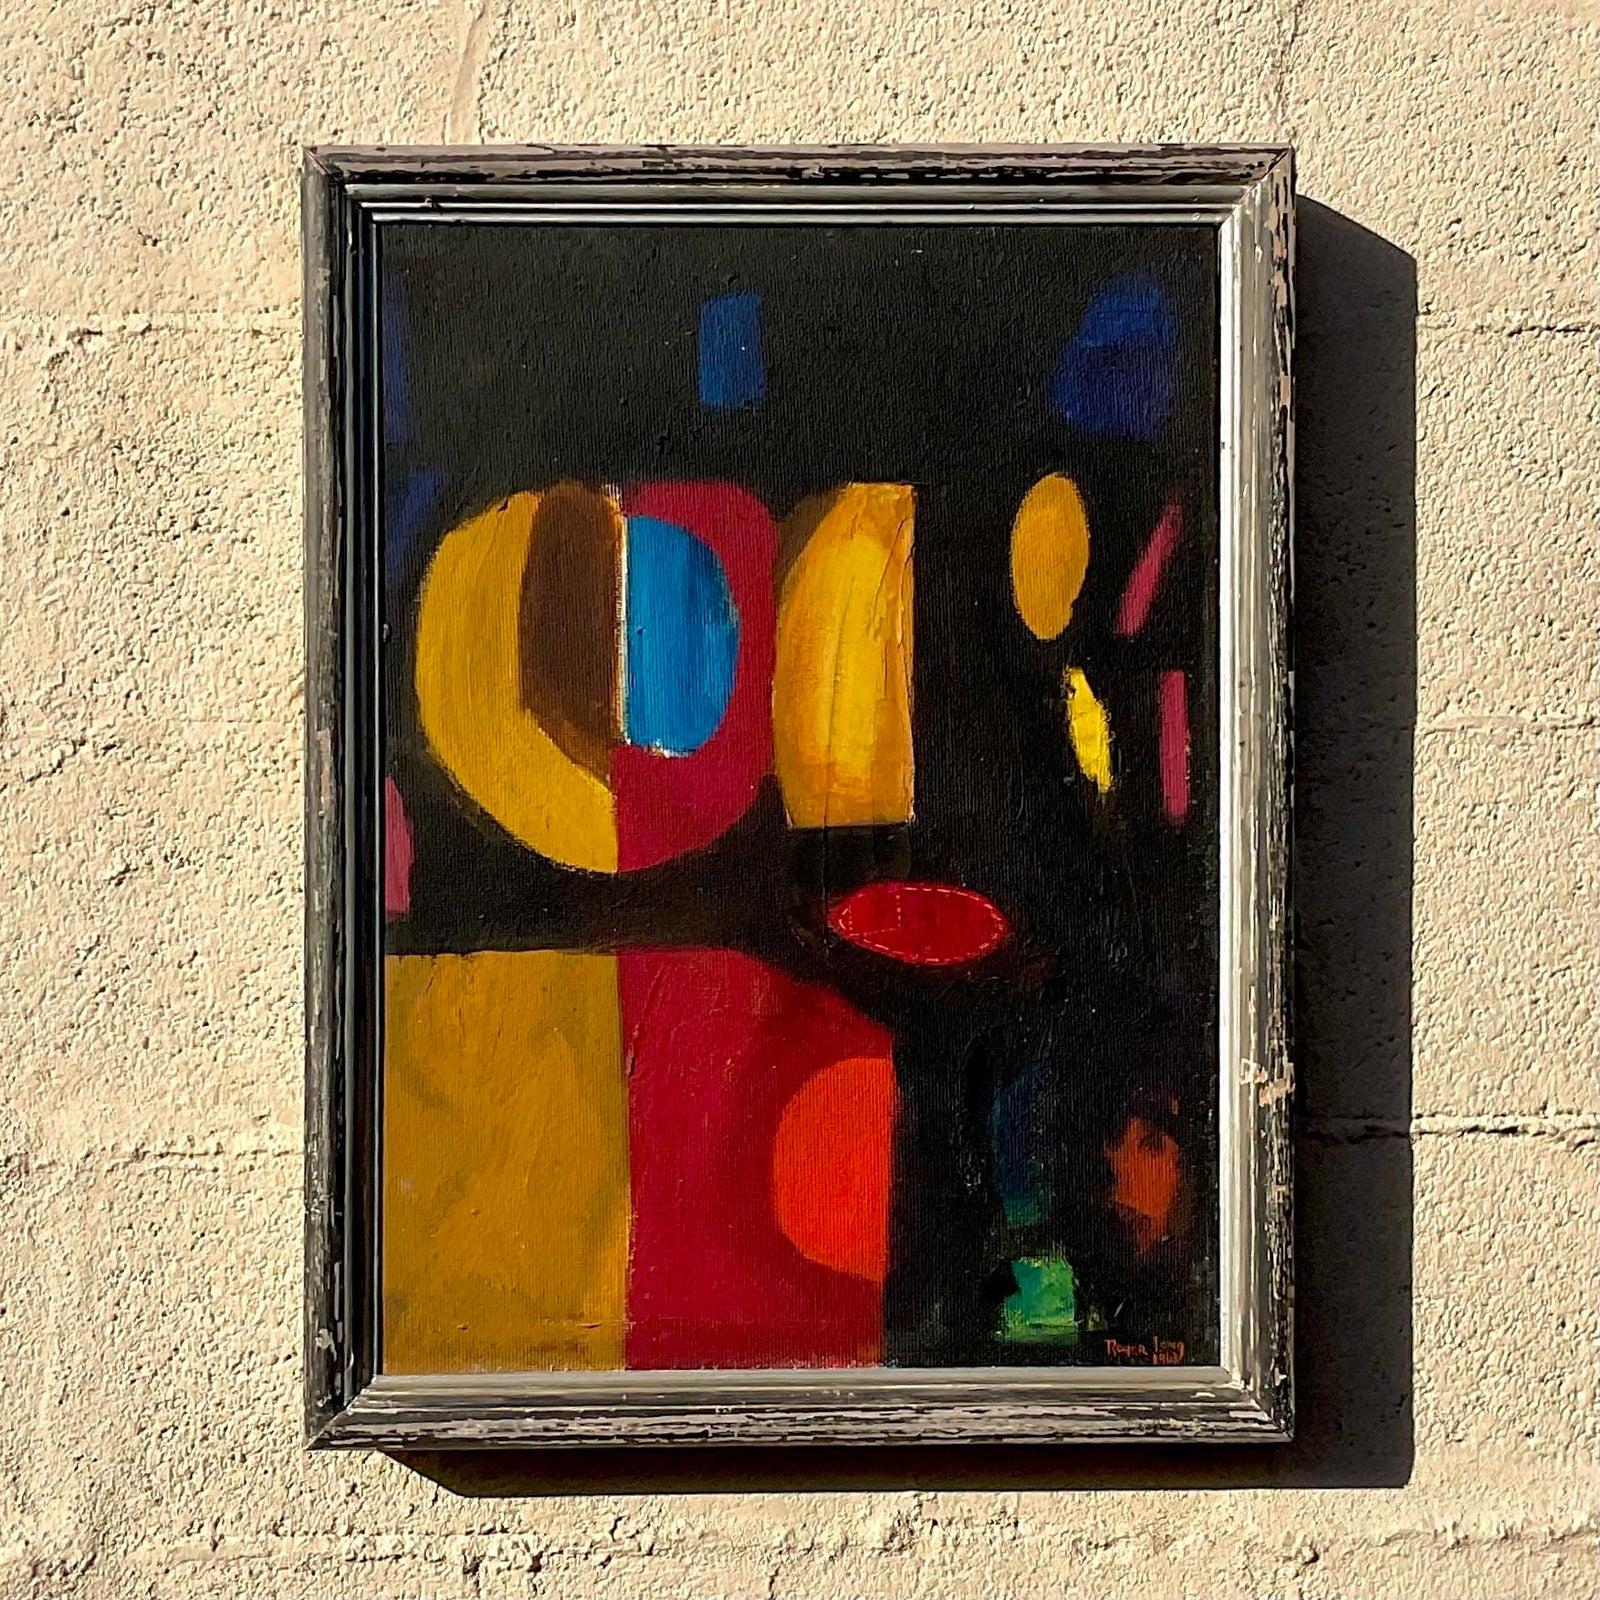 A stunning vintage abstract painting featuring colorful geometric shapes against a dark background. The painting is signed on the bottom right corner by the artist dated 1966. Acquired at a Palm Beach estate. 